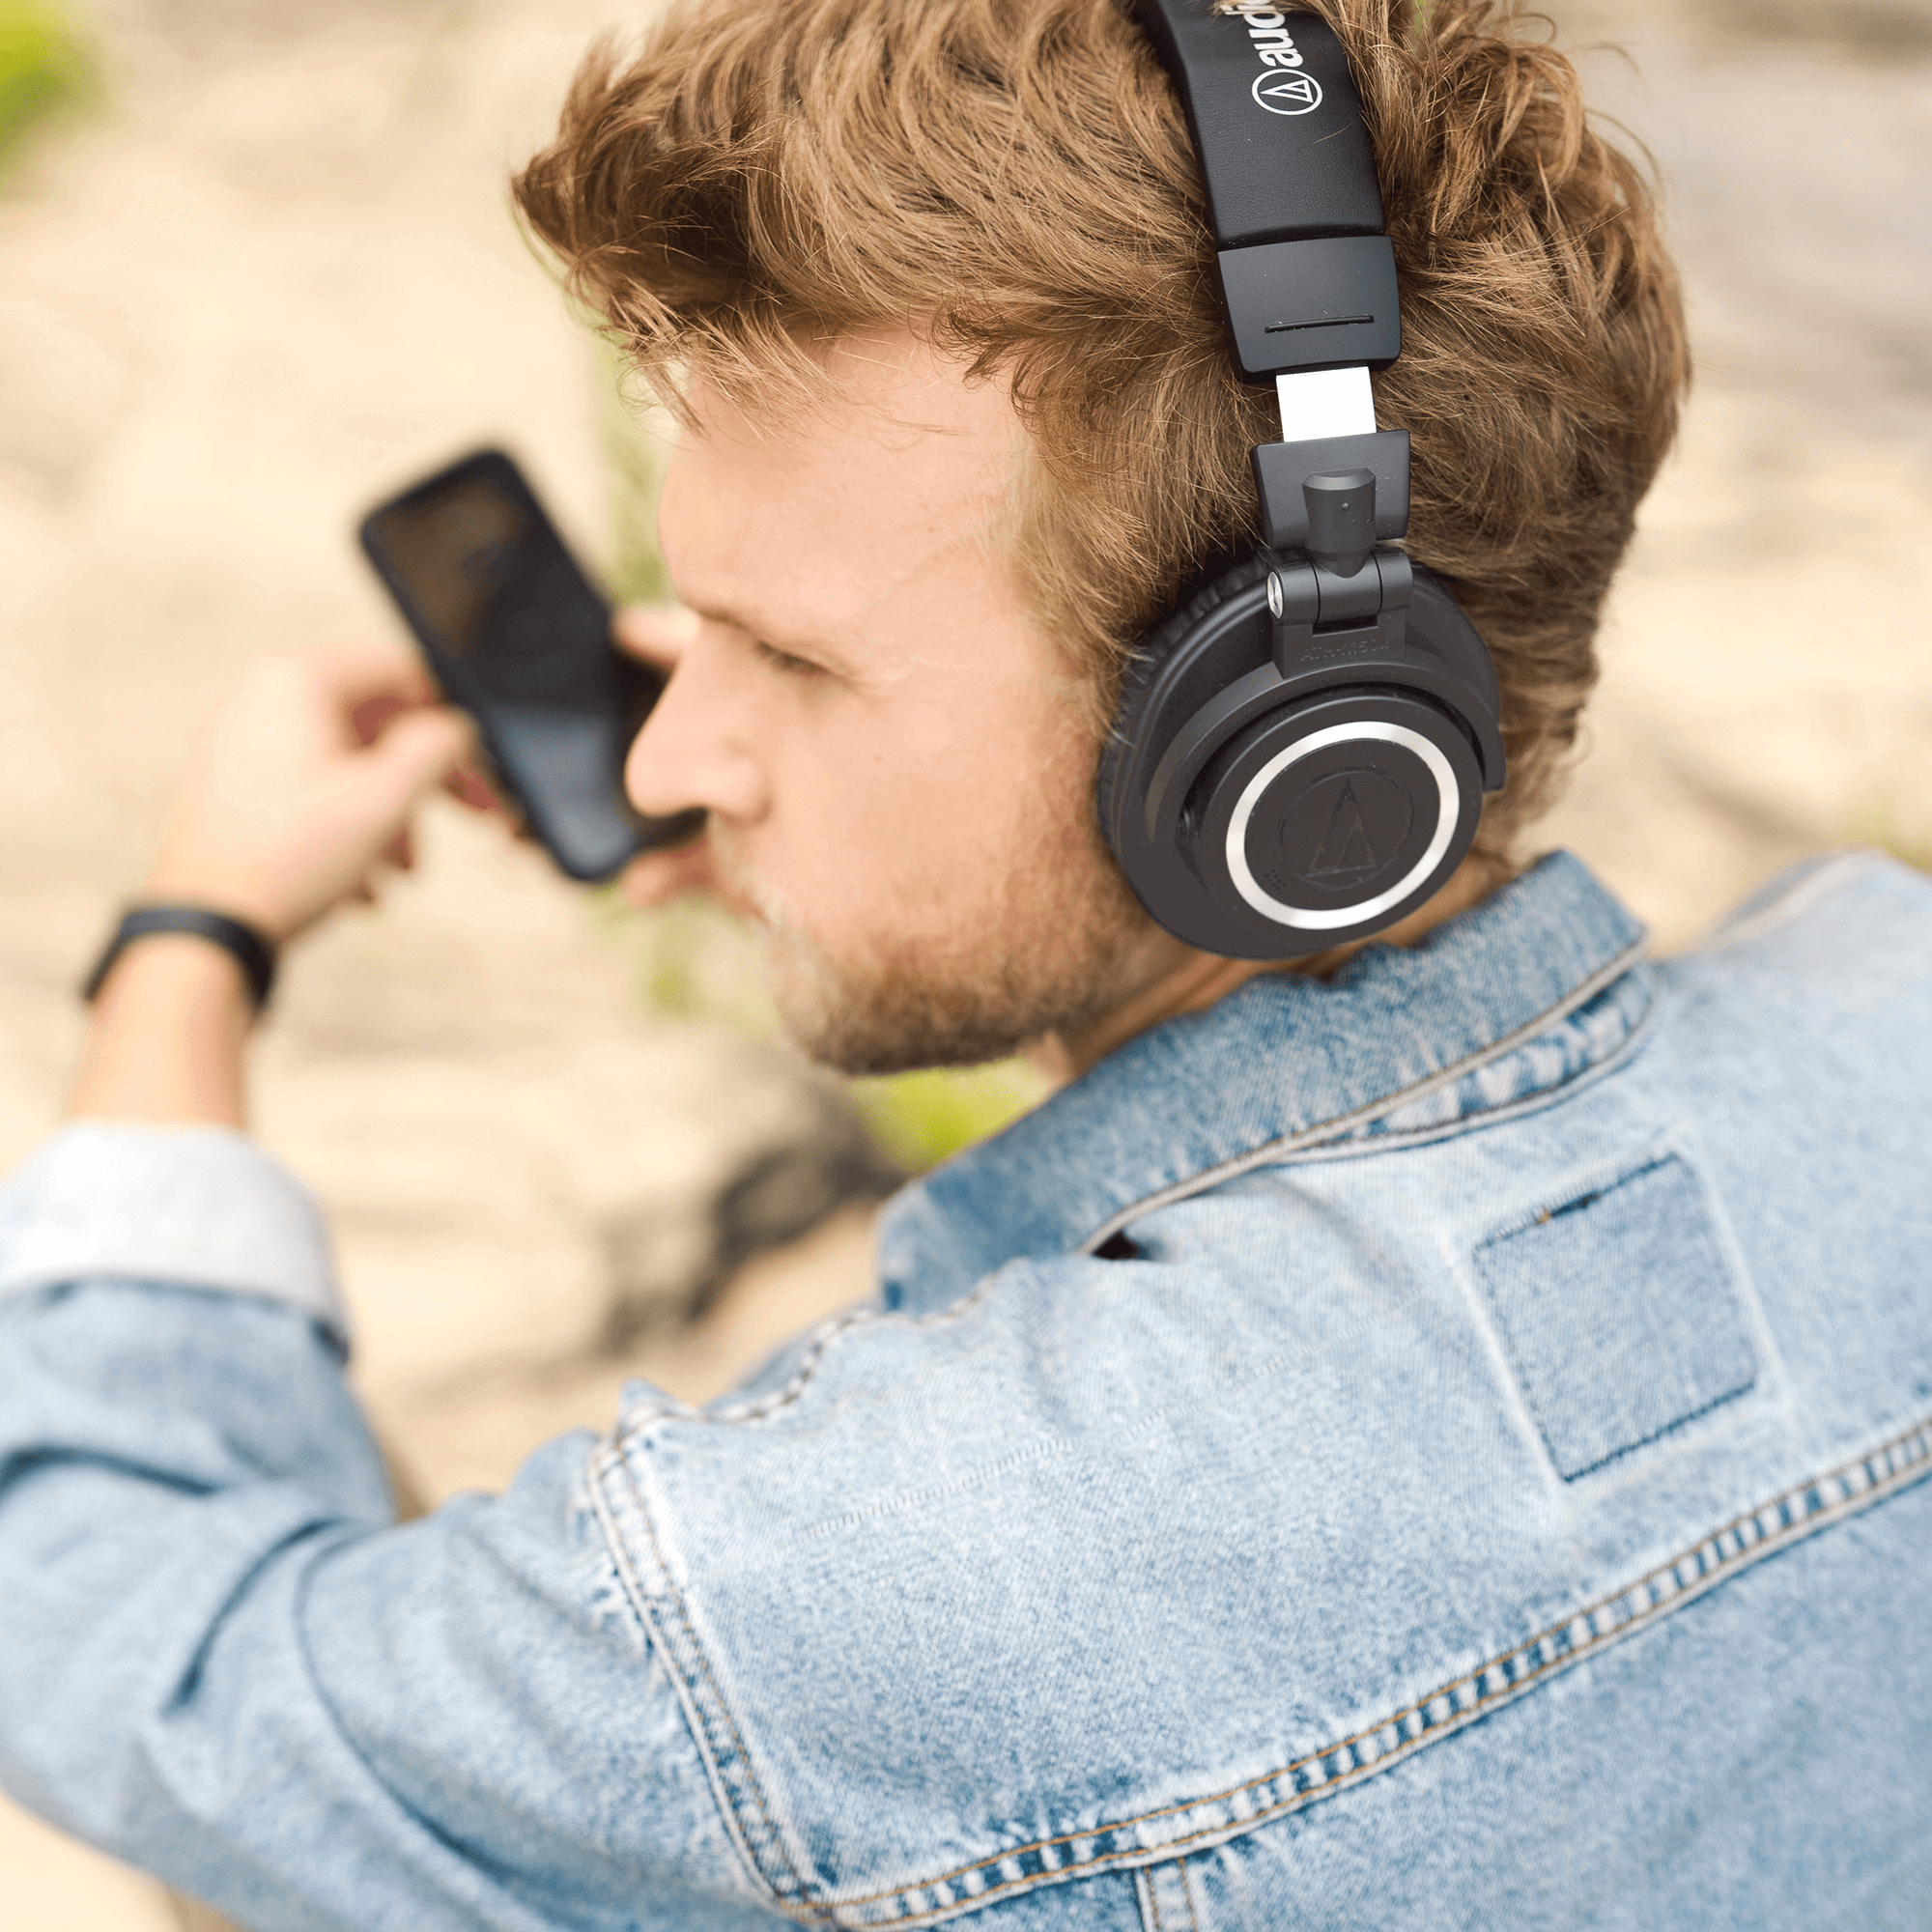 Audio-Technica ATH-M50xBT2: Recommended by audio experts, loved by casual  listeners